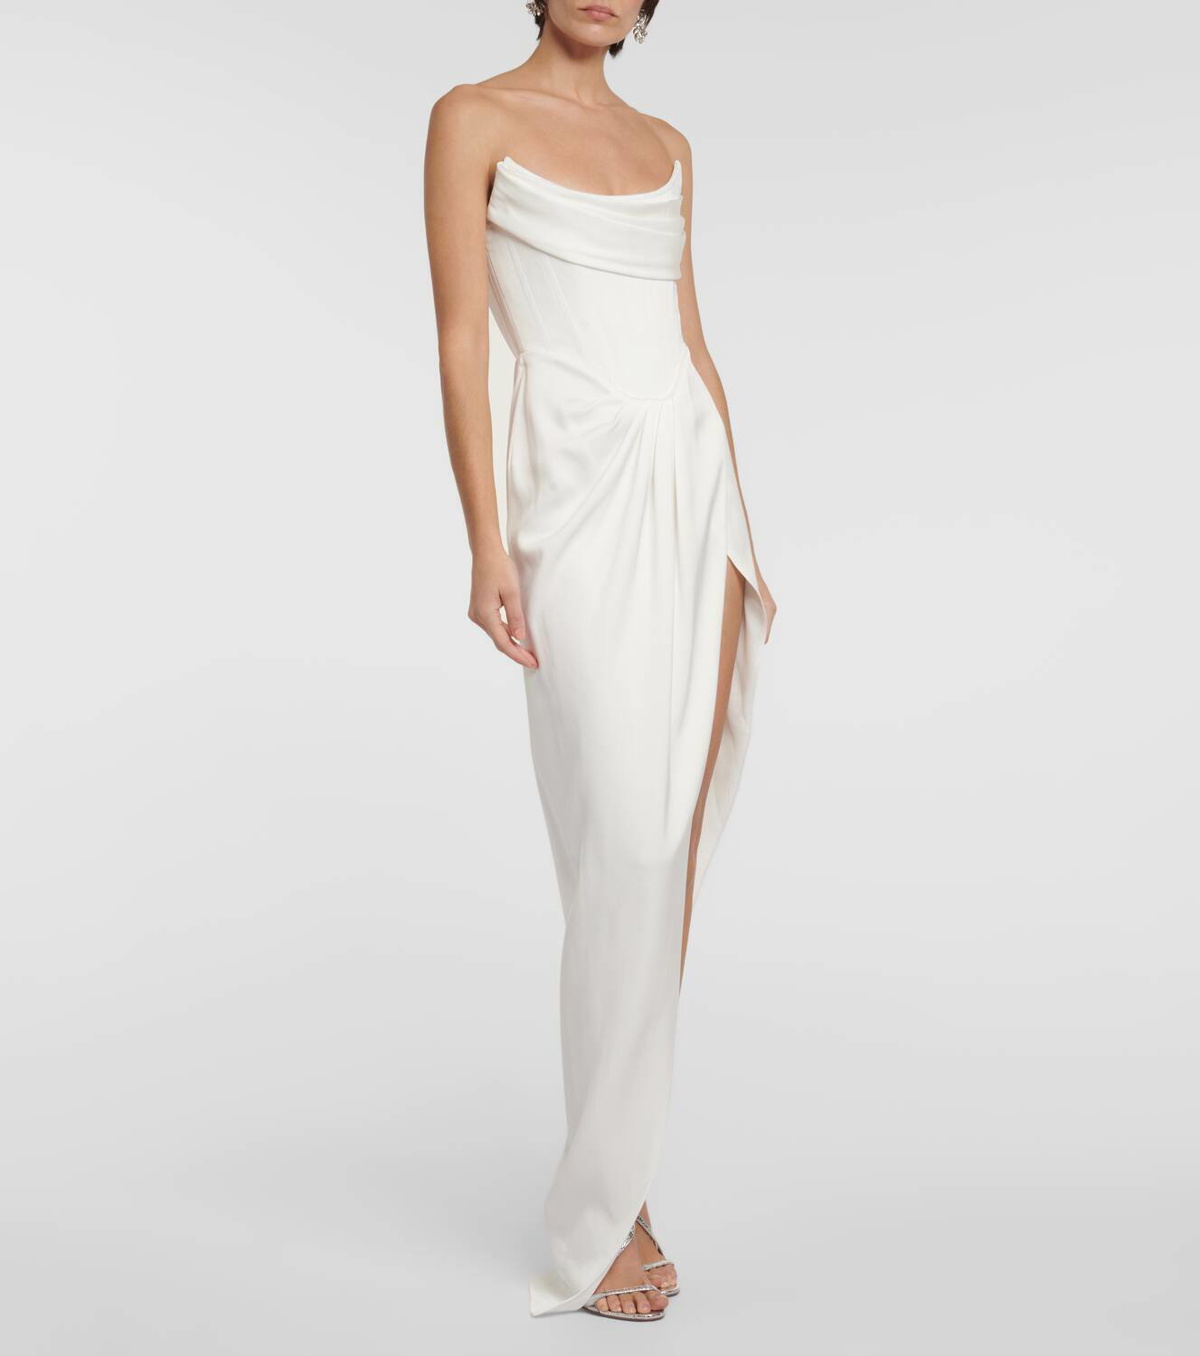 Alex Perry Satin crêpe draped bustier gown Alex Perry